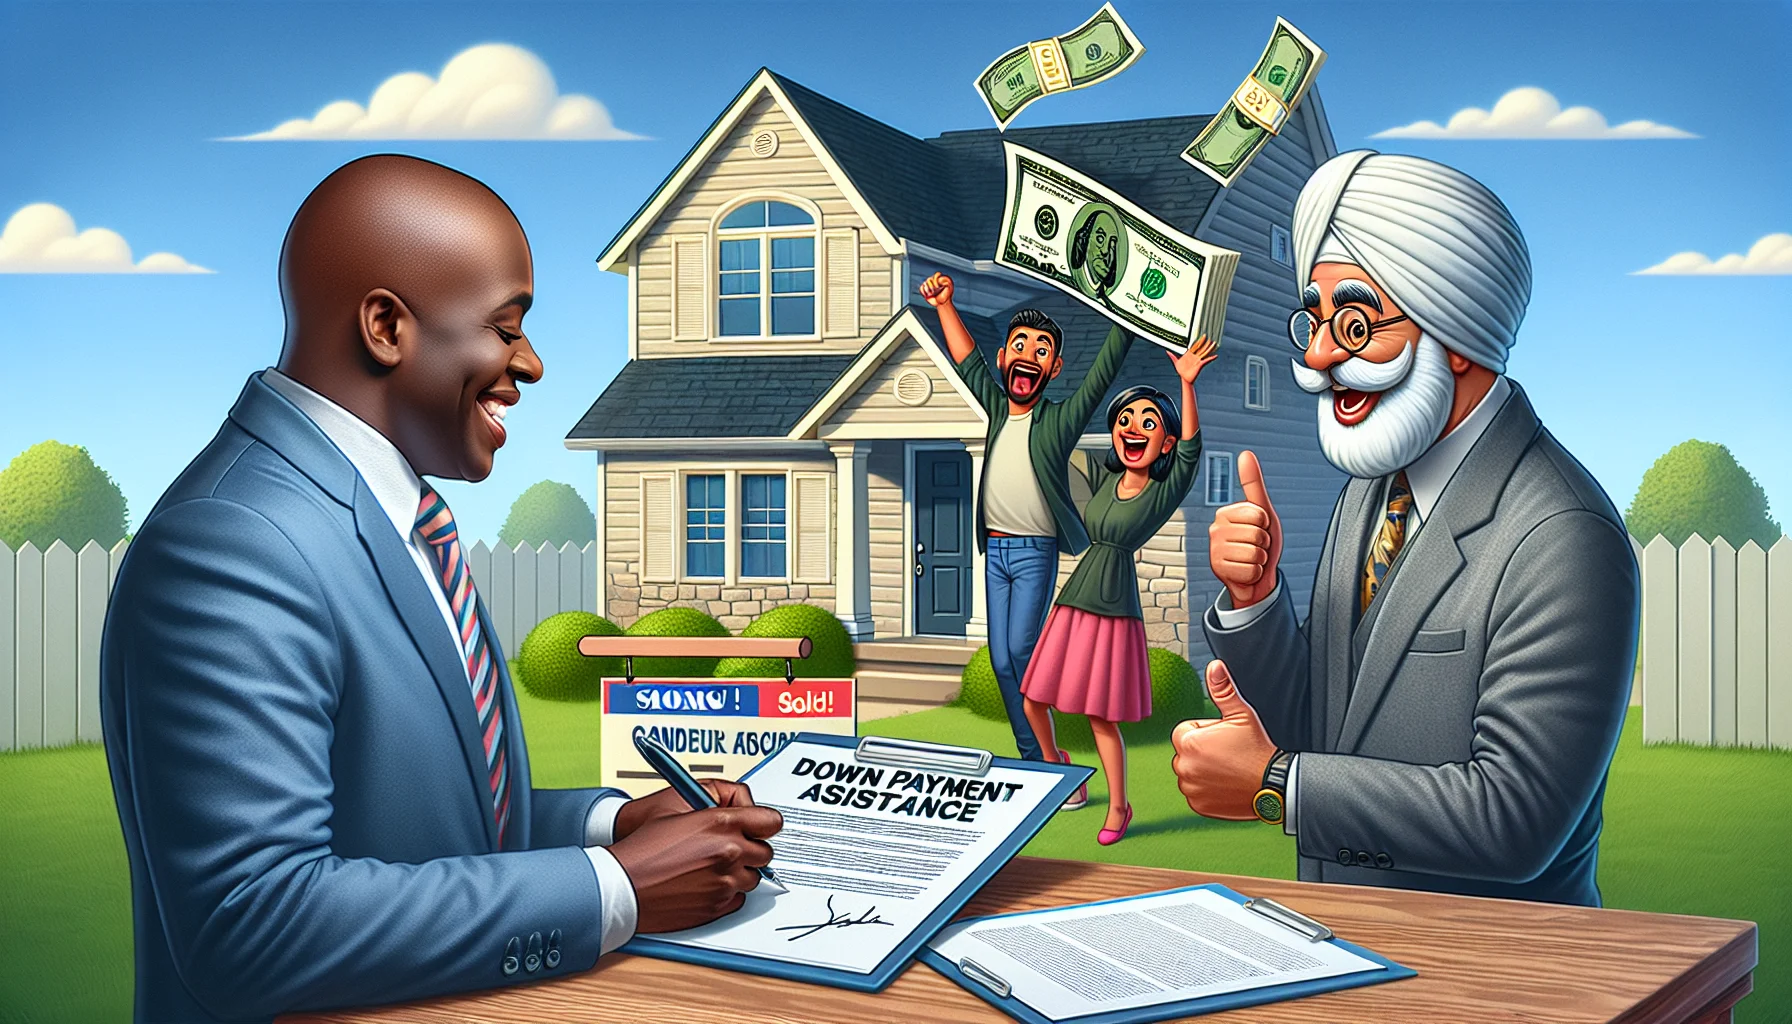 A humorous yet realistic scene showcasing a perfect scenario for down payment assistance concerning conventional loans in real estate. In the image's foreground, a cheerful African-American real estate agent is signing off on a down payment assistance contract, while a thrilled Middle-Eastern couple cheer in the background, holding their new house keys. The cozy home they are about to buy looks charming in the backdrop, with a 'Sold' sign in the yard. Above them, a clear sky displays a comically oversized dollar note symbolizing the financial assistance, and a cartoon-like bank mascot salutes from the lower corner with a welcoming smile.